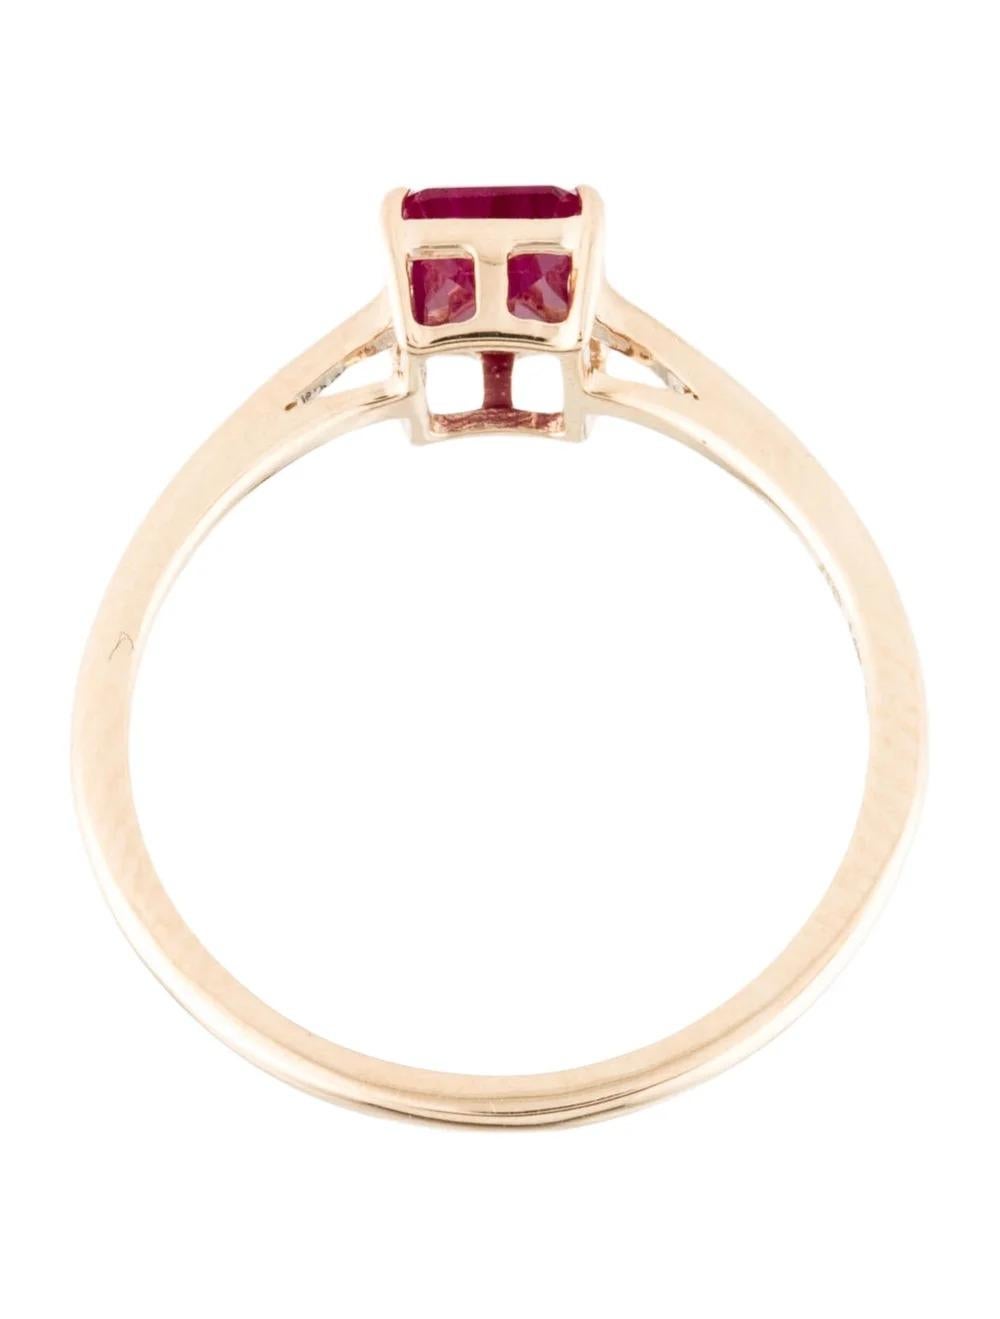 Women's 14K Ruby Cocktail Ring, Size 6.75: Elegant Red Gemstone in Yellow Gold Setting For Sale